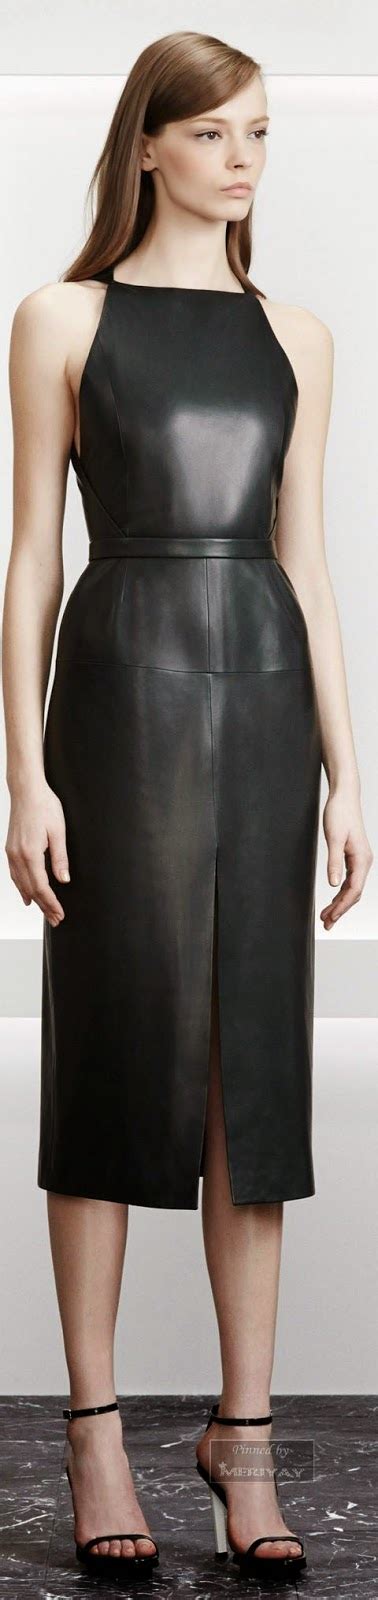 Womens Fashion Edgy Black Leather Dress Luvtolook Virtual Styling